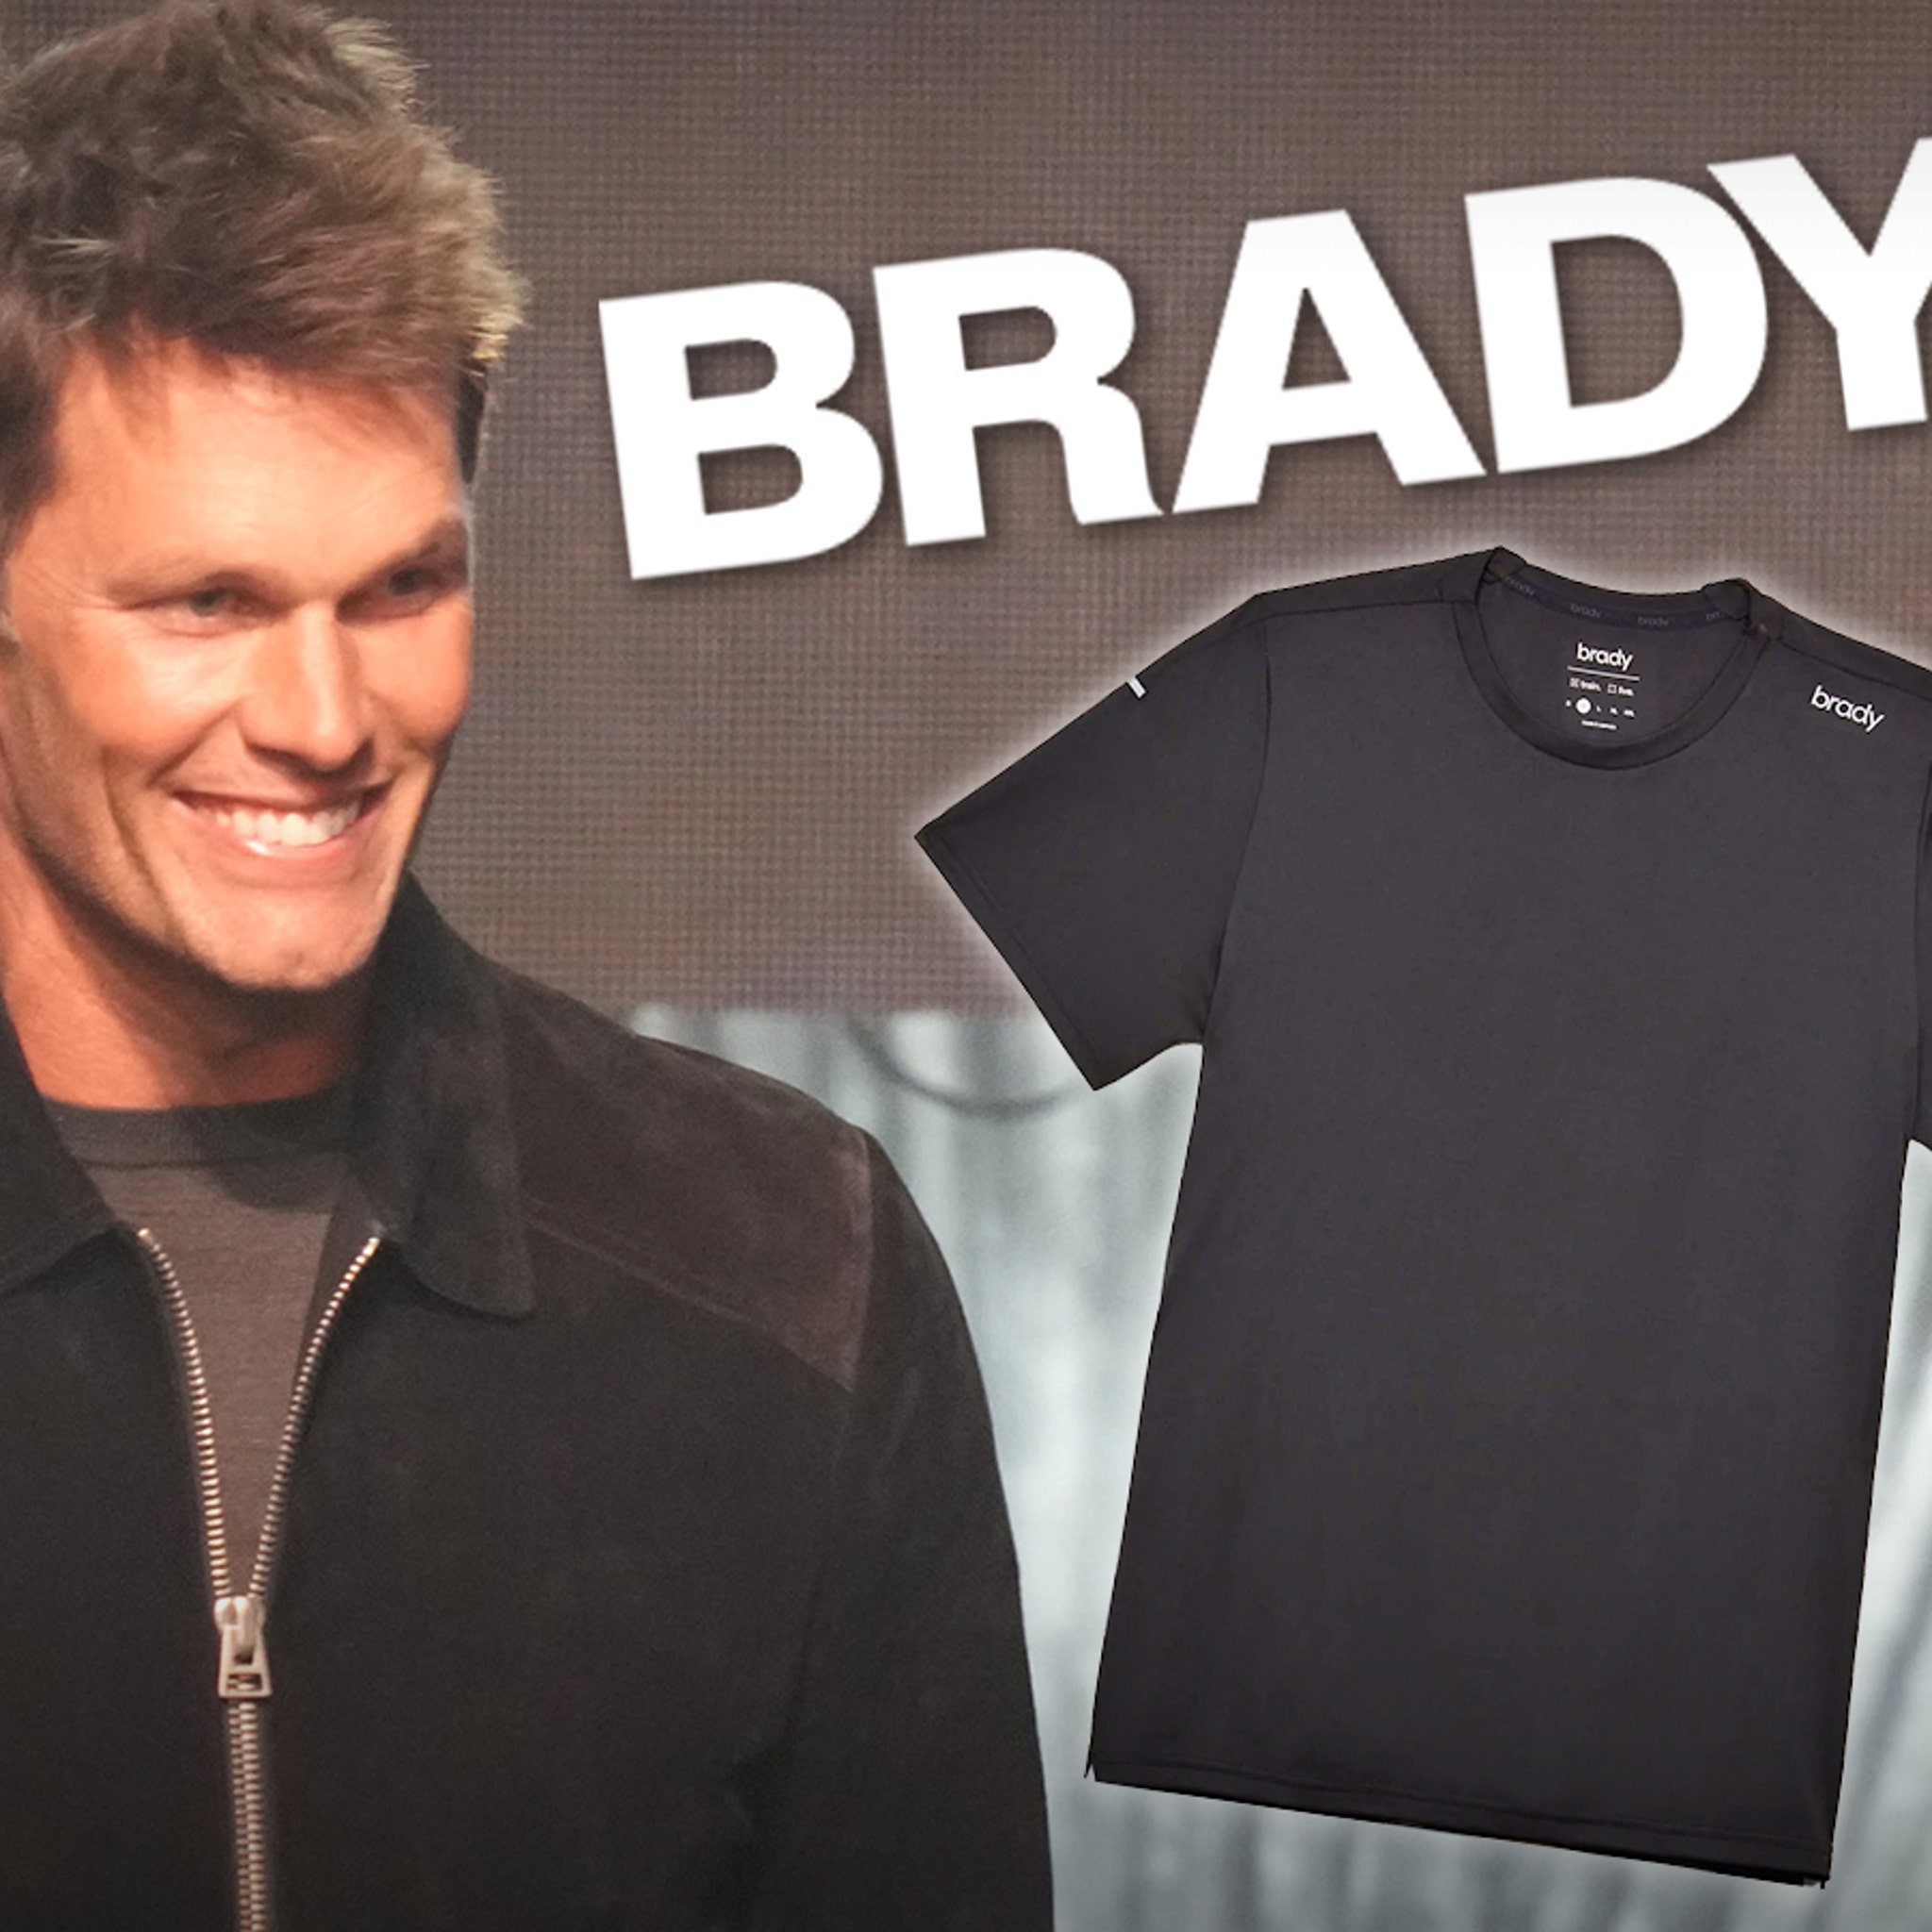 Tom Brady Launches Clothing Line, T-Shirts Have $75 Price Tag